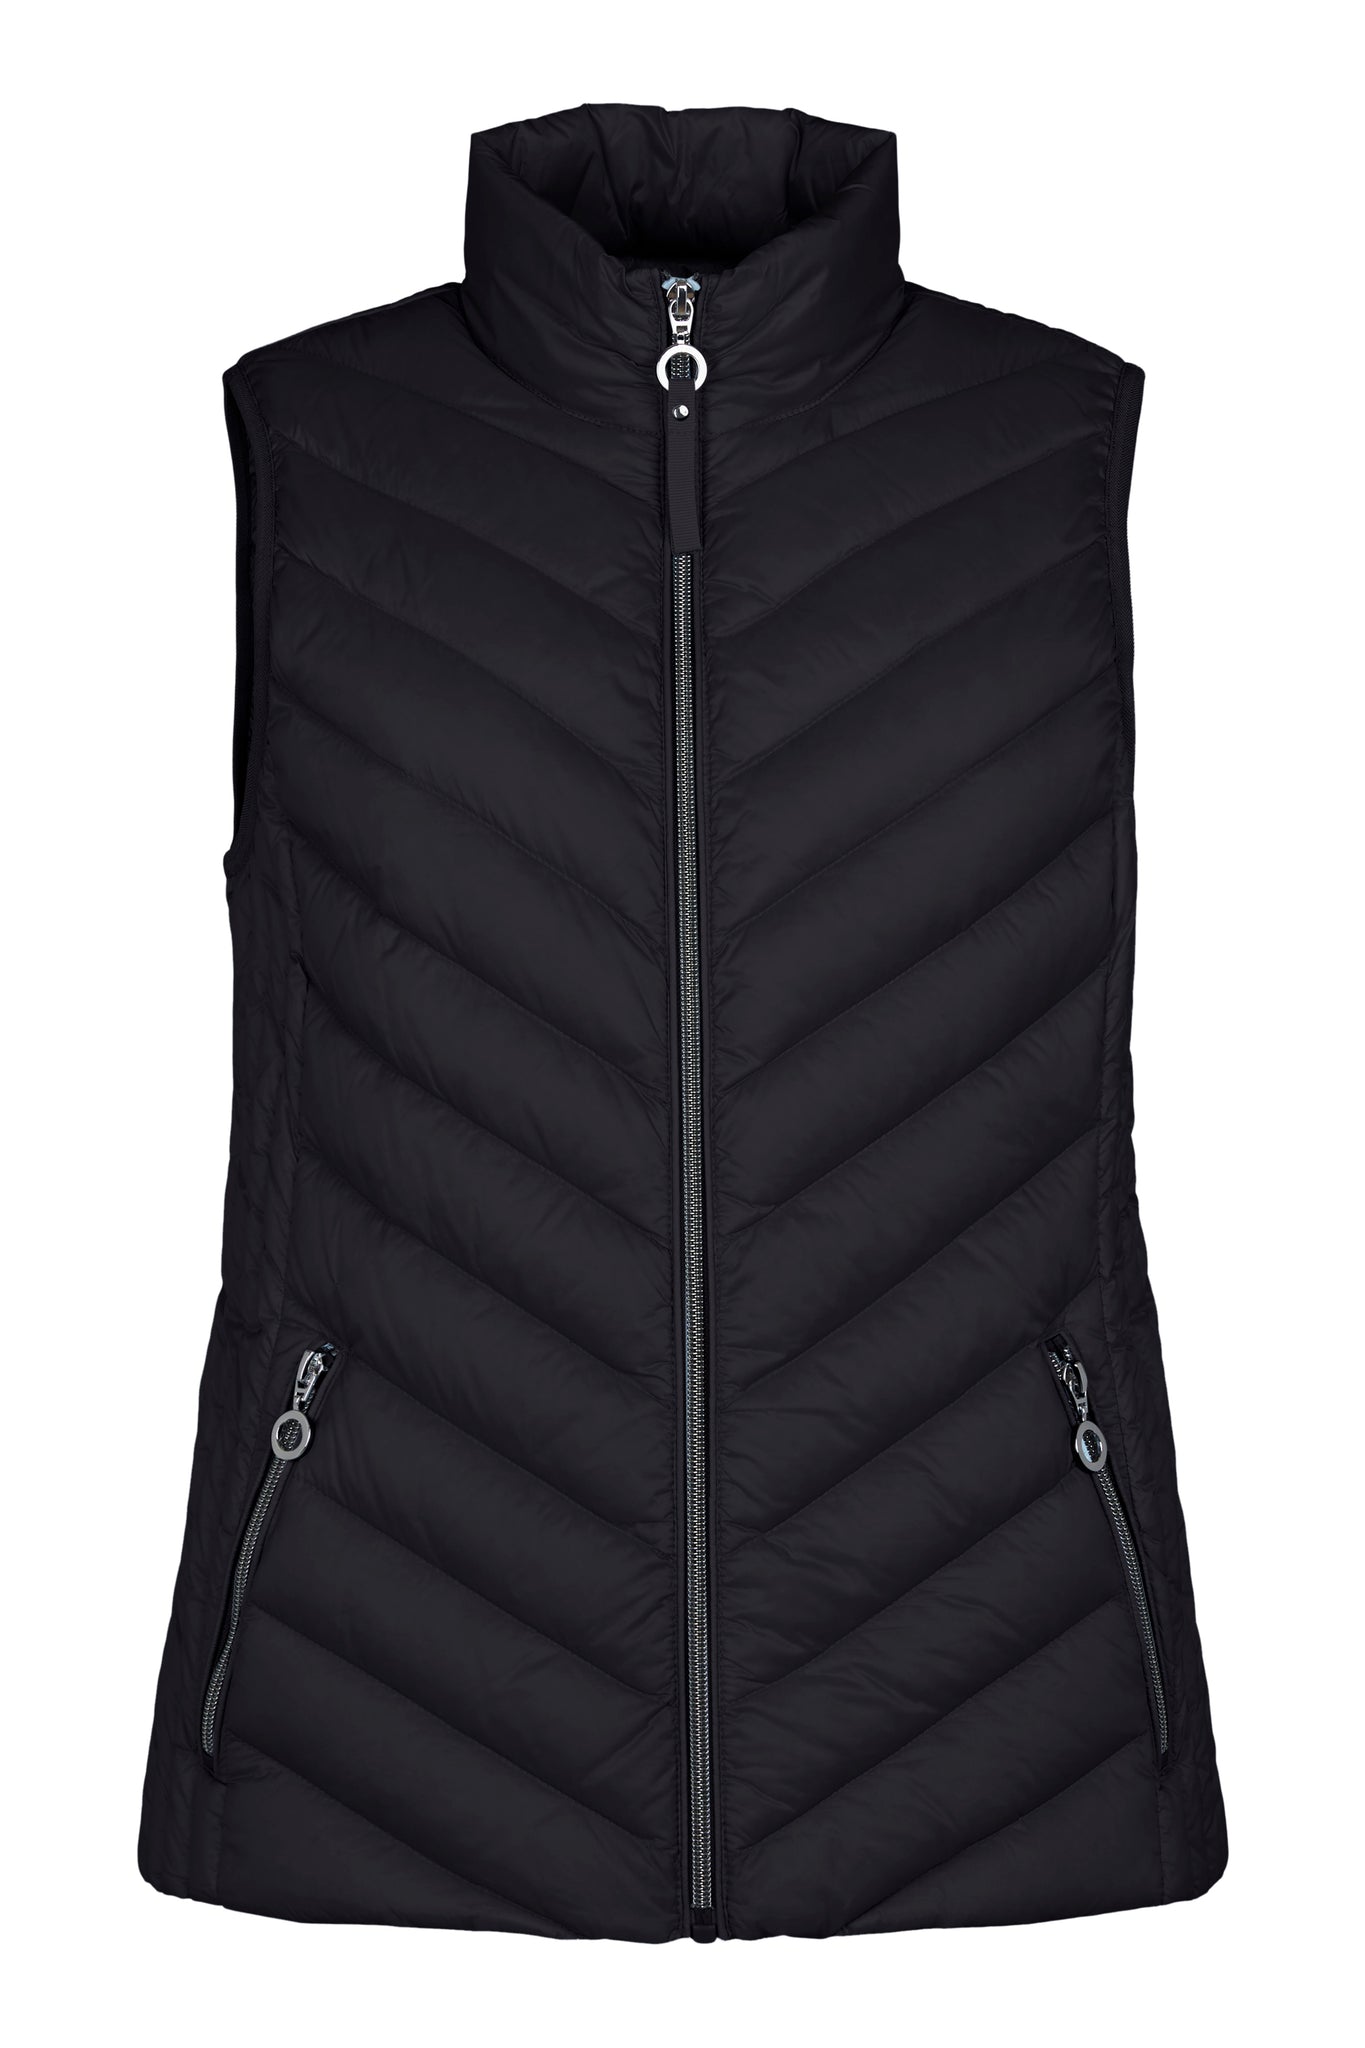 Lightweight Extra Warmth Down Filled  Gilet by Fransden 529 588